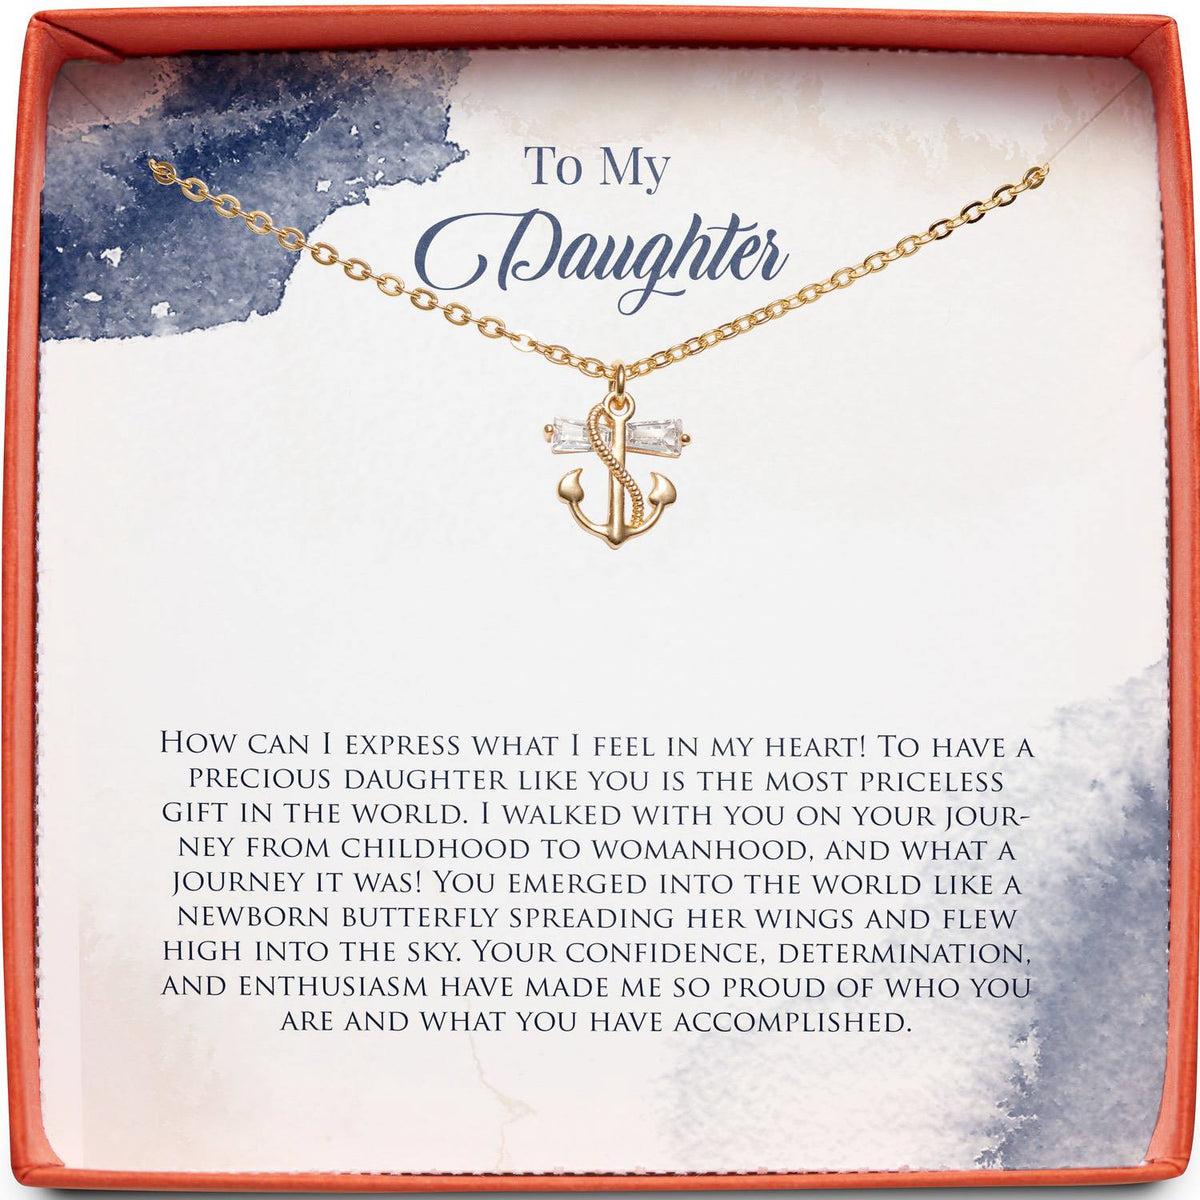 To My Daughter | Precious Daughter Like You | Anchor Necklace